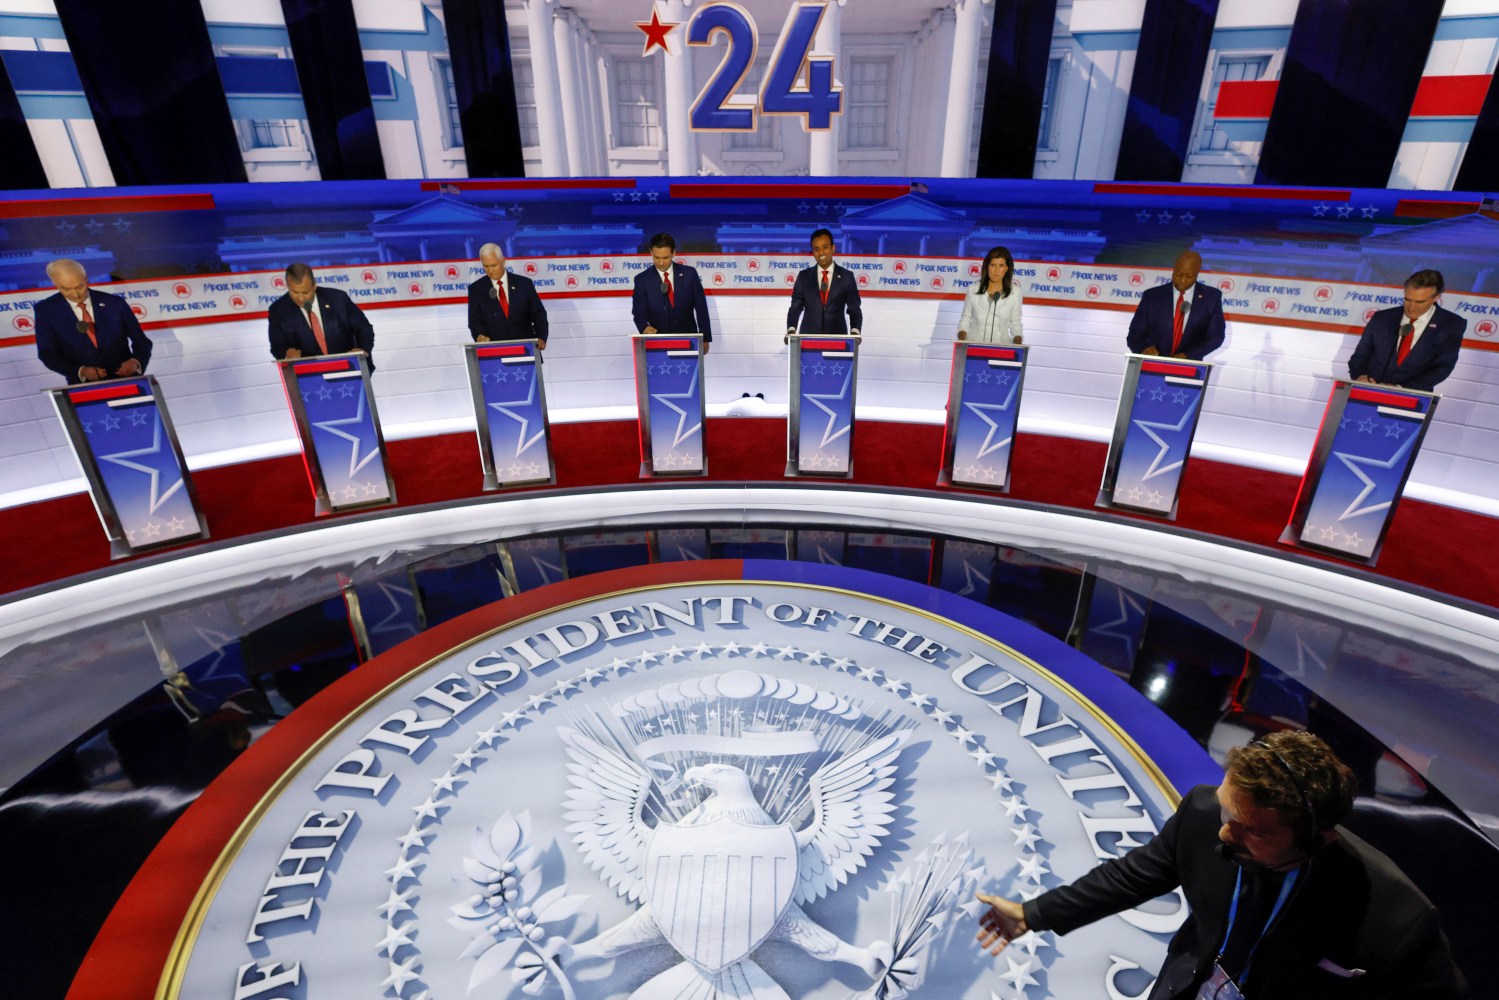 What happened in the first GOP presidential debate and why it matters